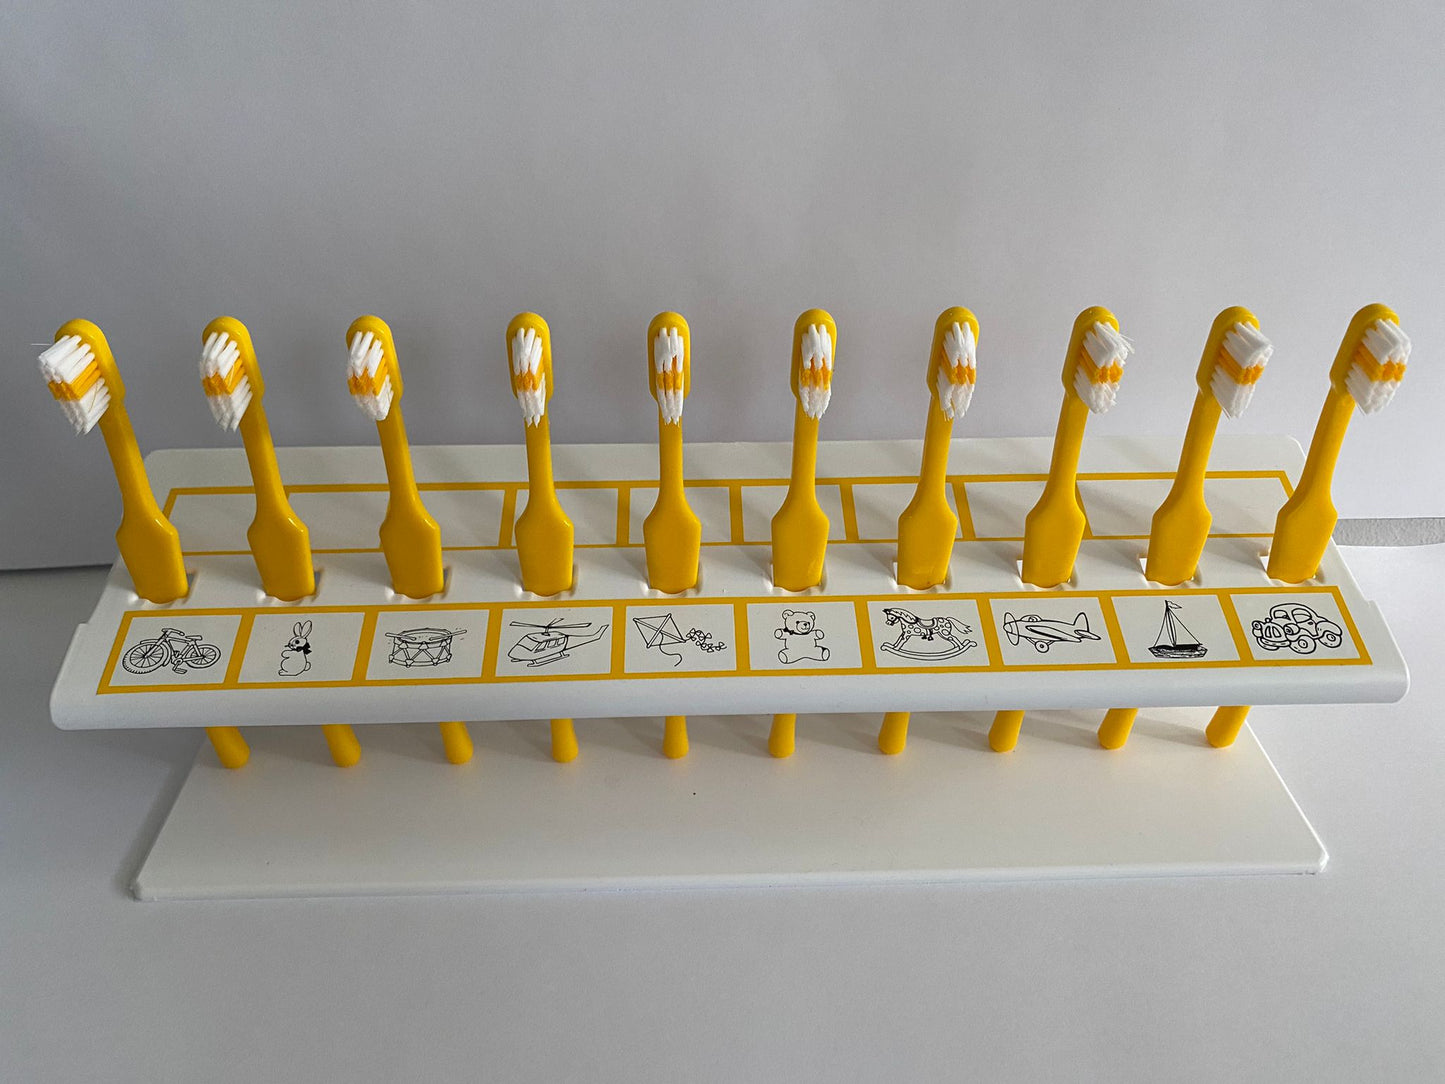 Toothbrush Rack with Toy symbols